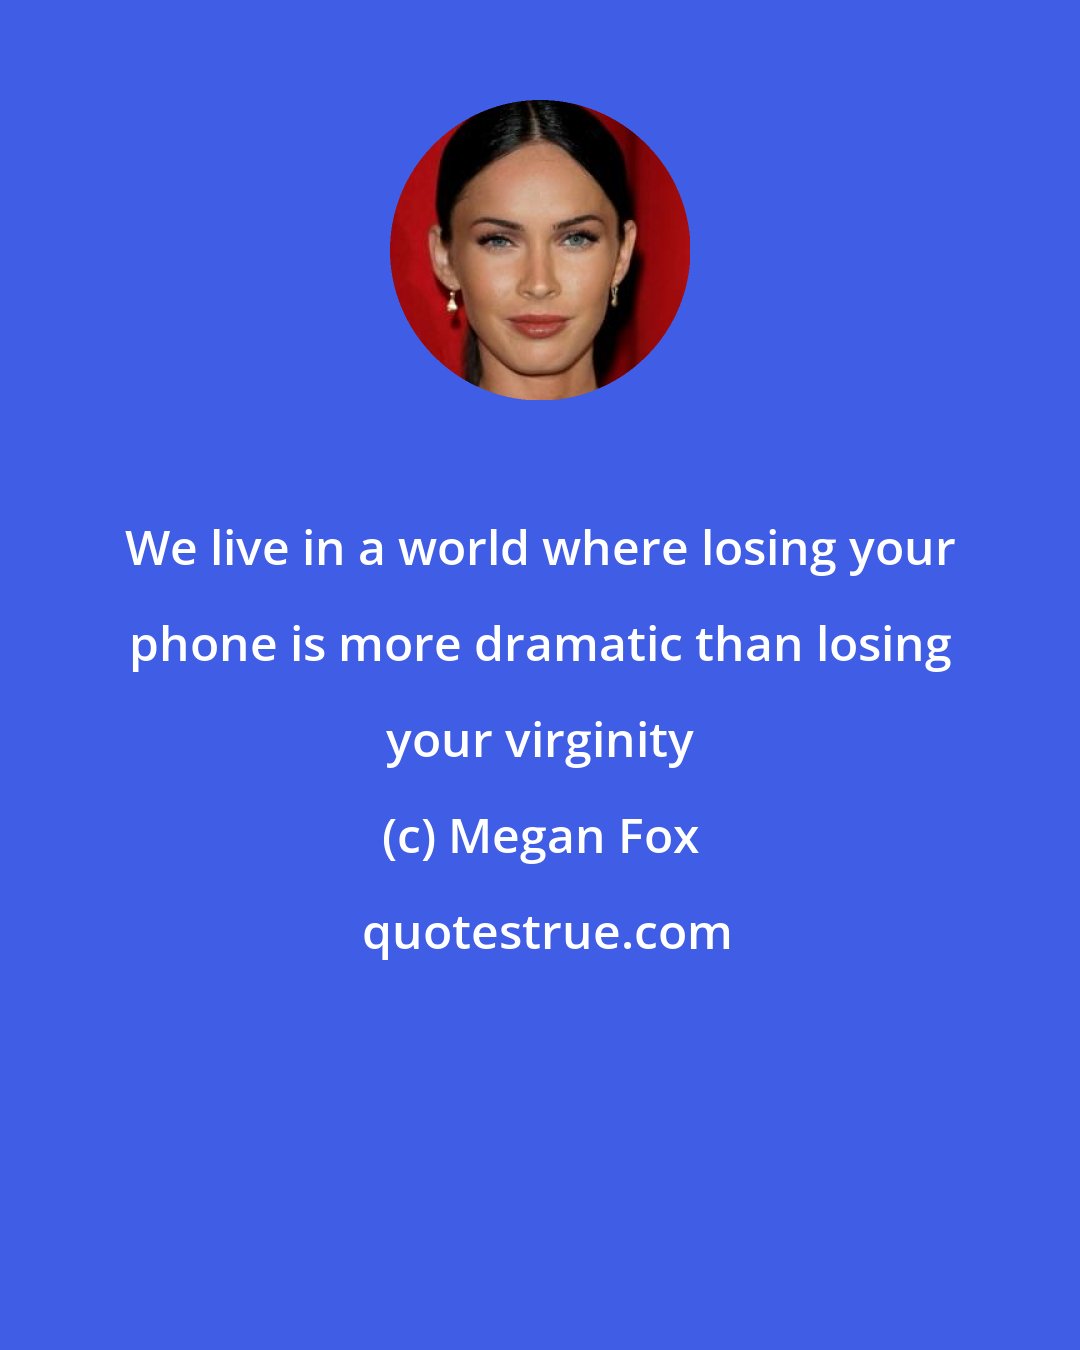 Megan Fox: We live in a world where losing your phone is more dramatic than losing your virginity